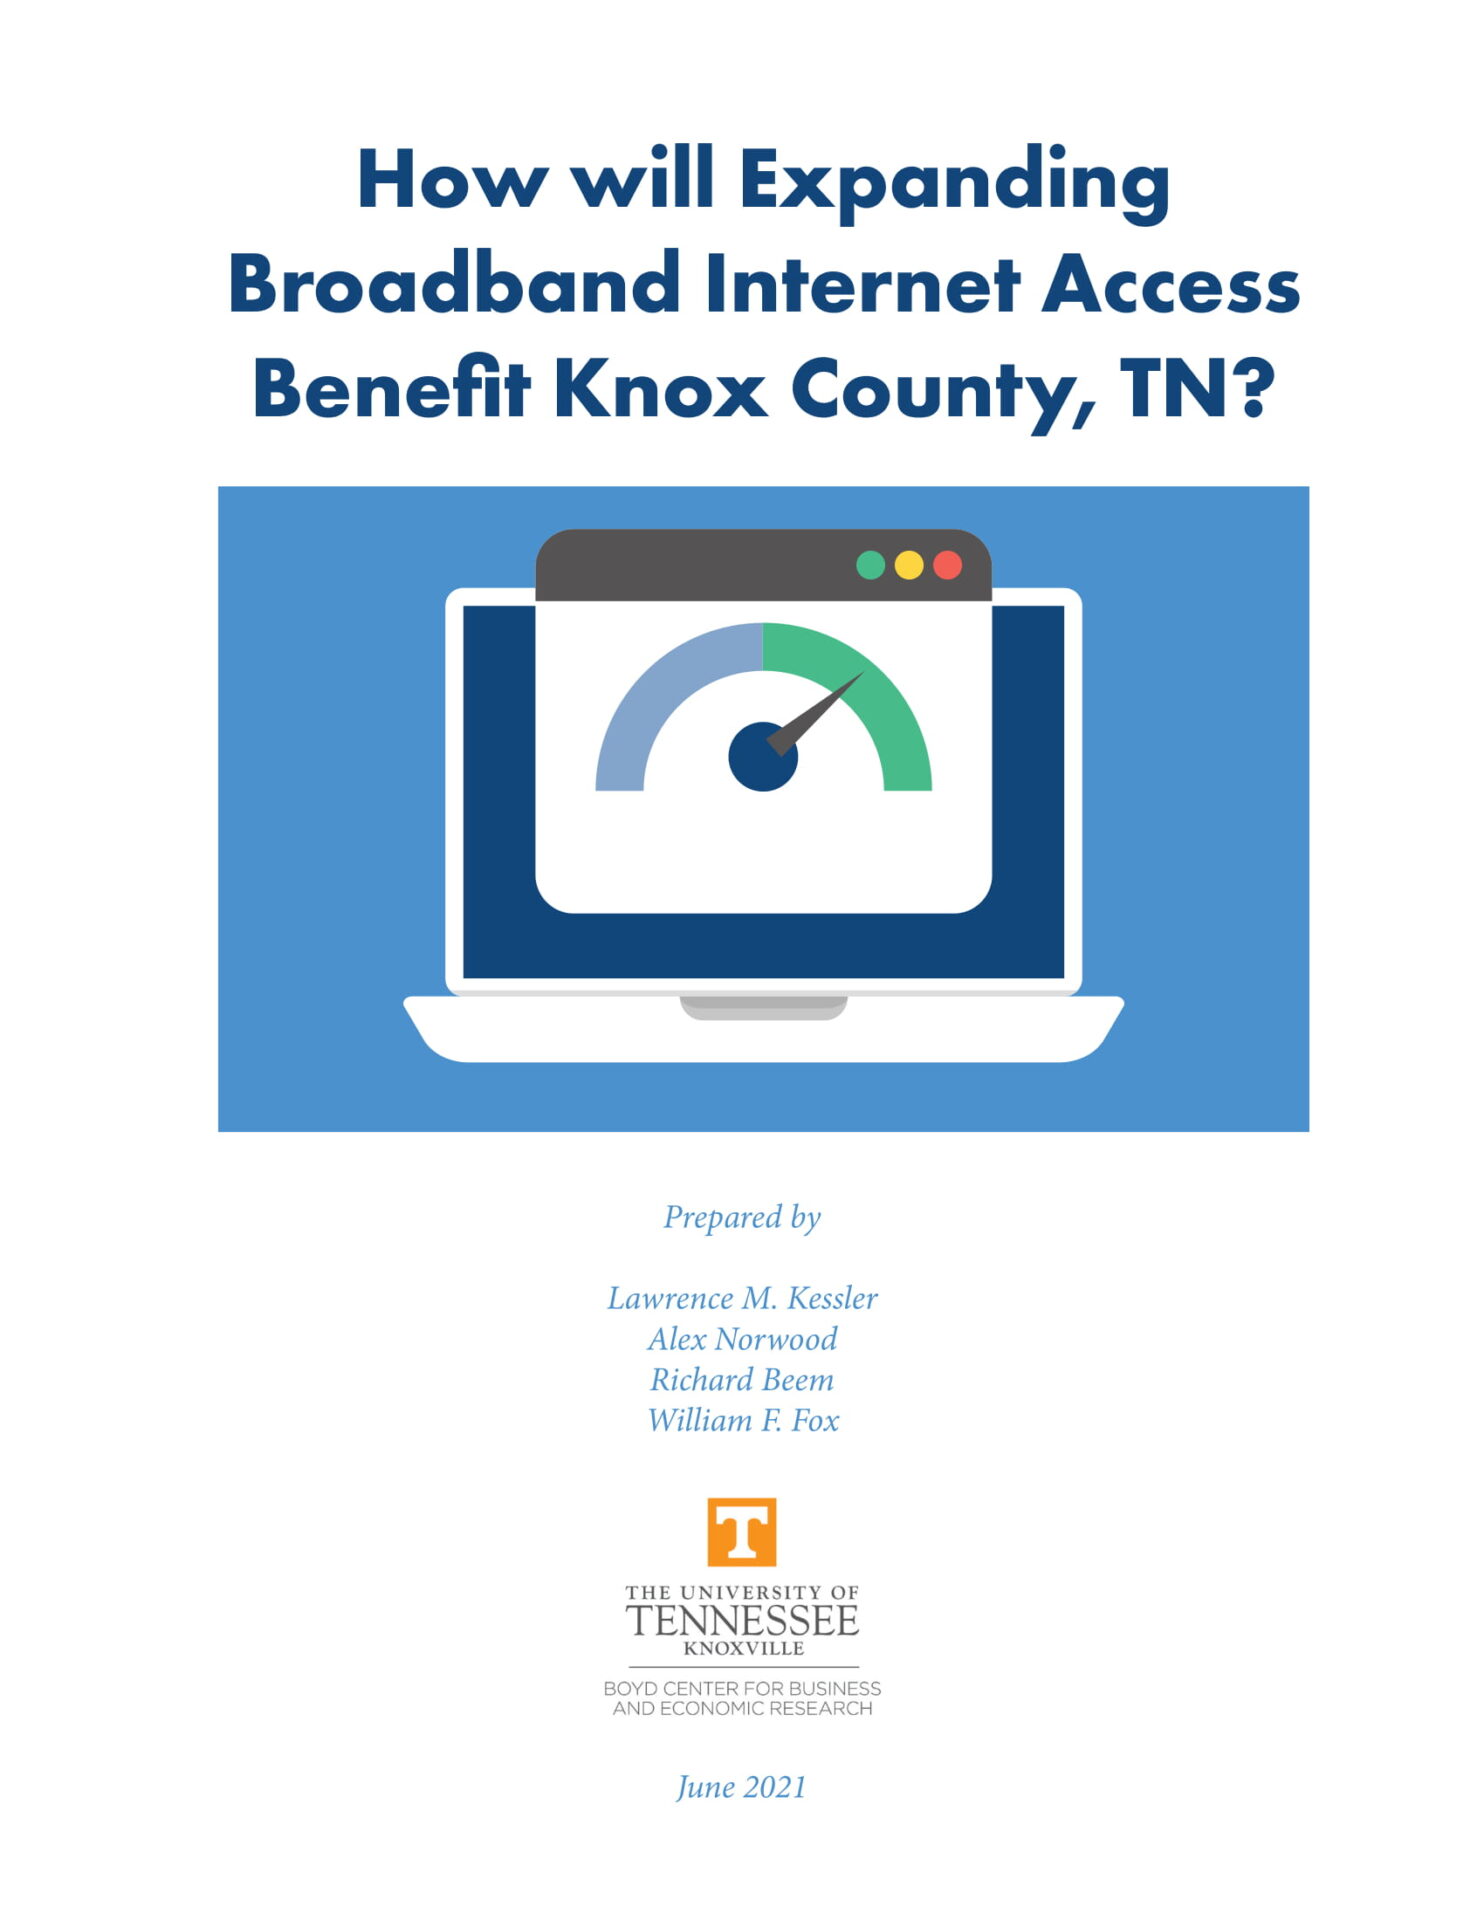 How will Expanding Broadband Internet Access Benefit Knox County, TN?